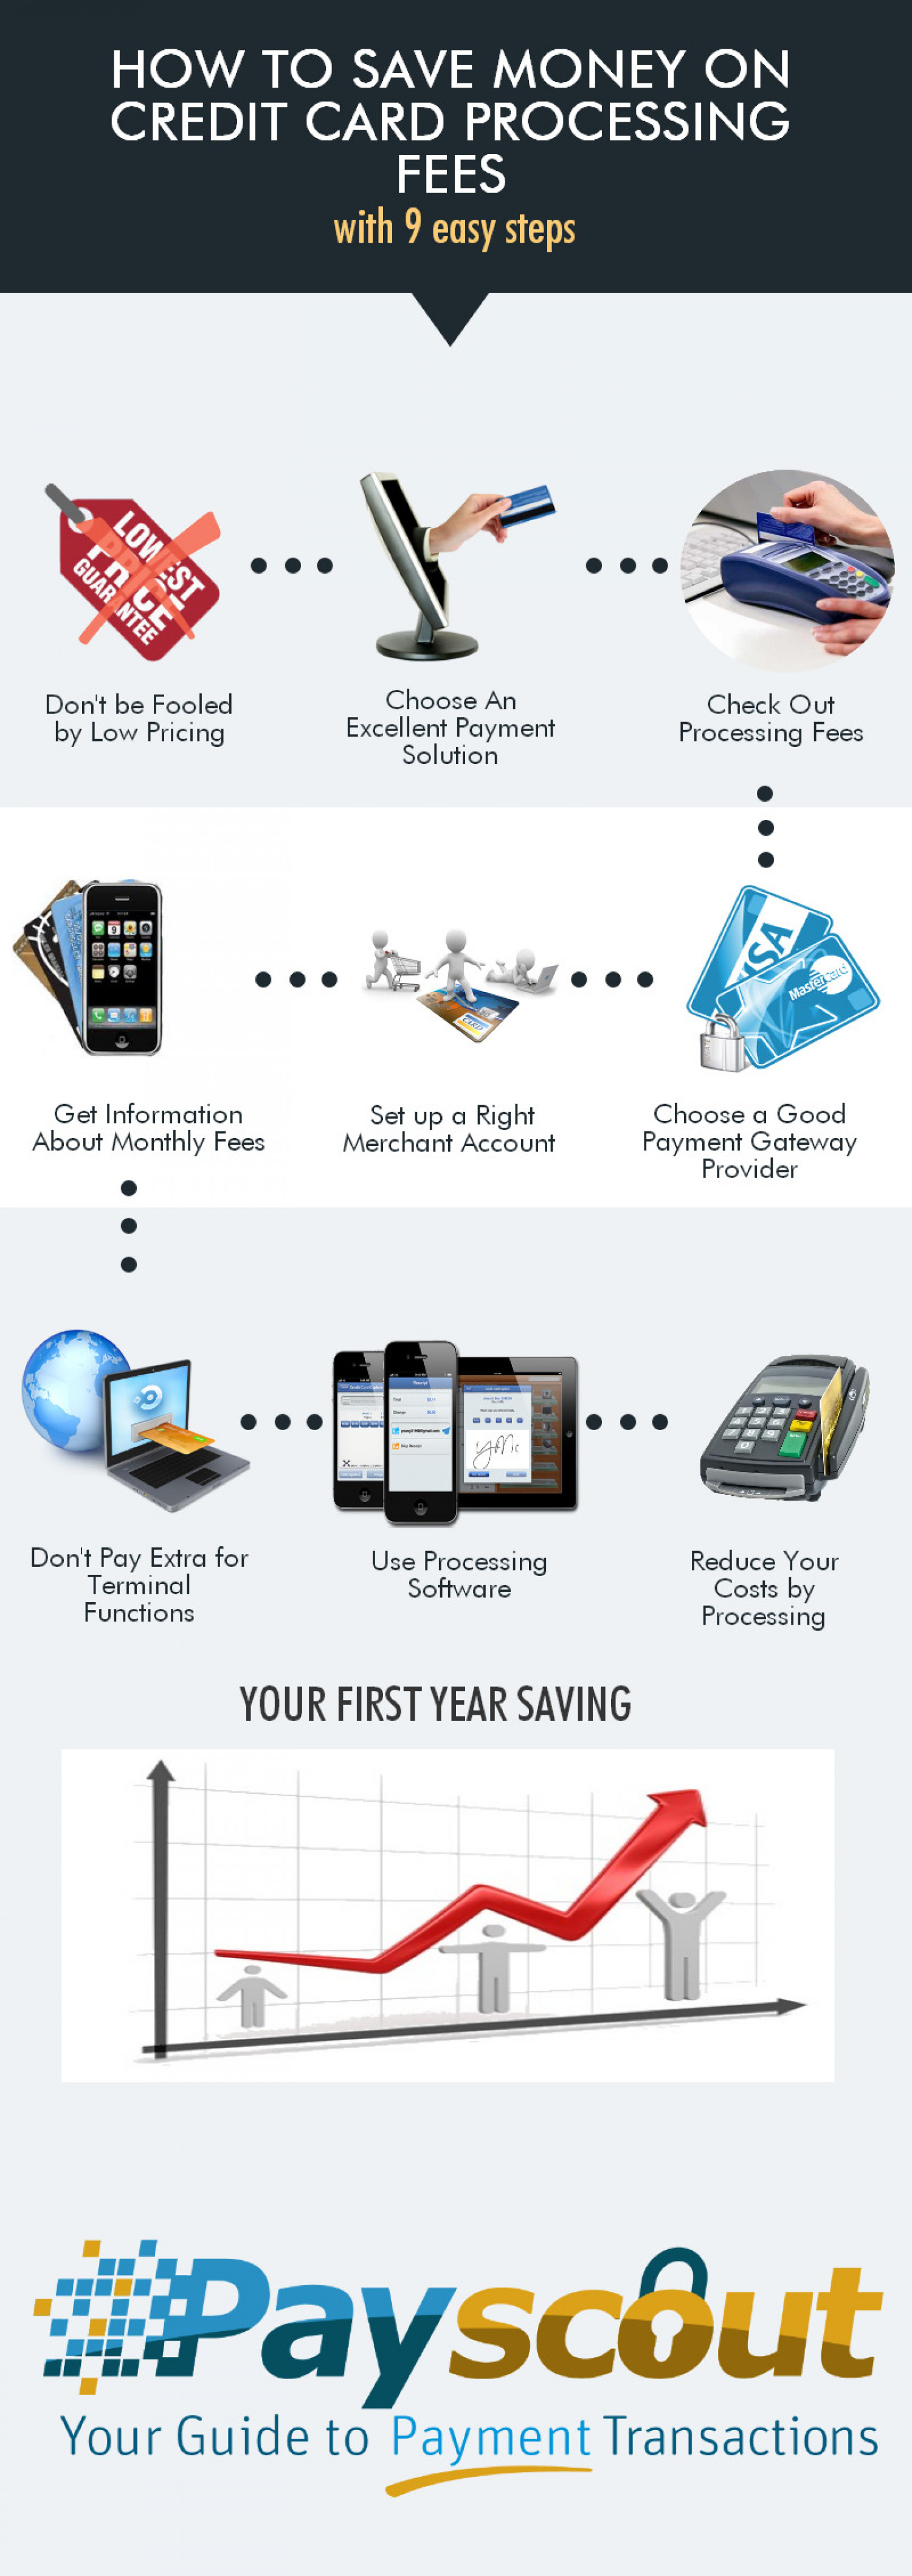 How to Save Money on Credit Card Processing Fees Infographic